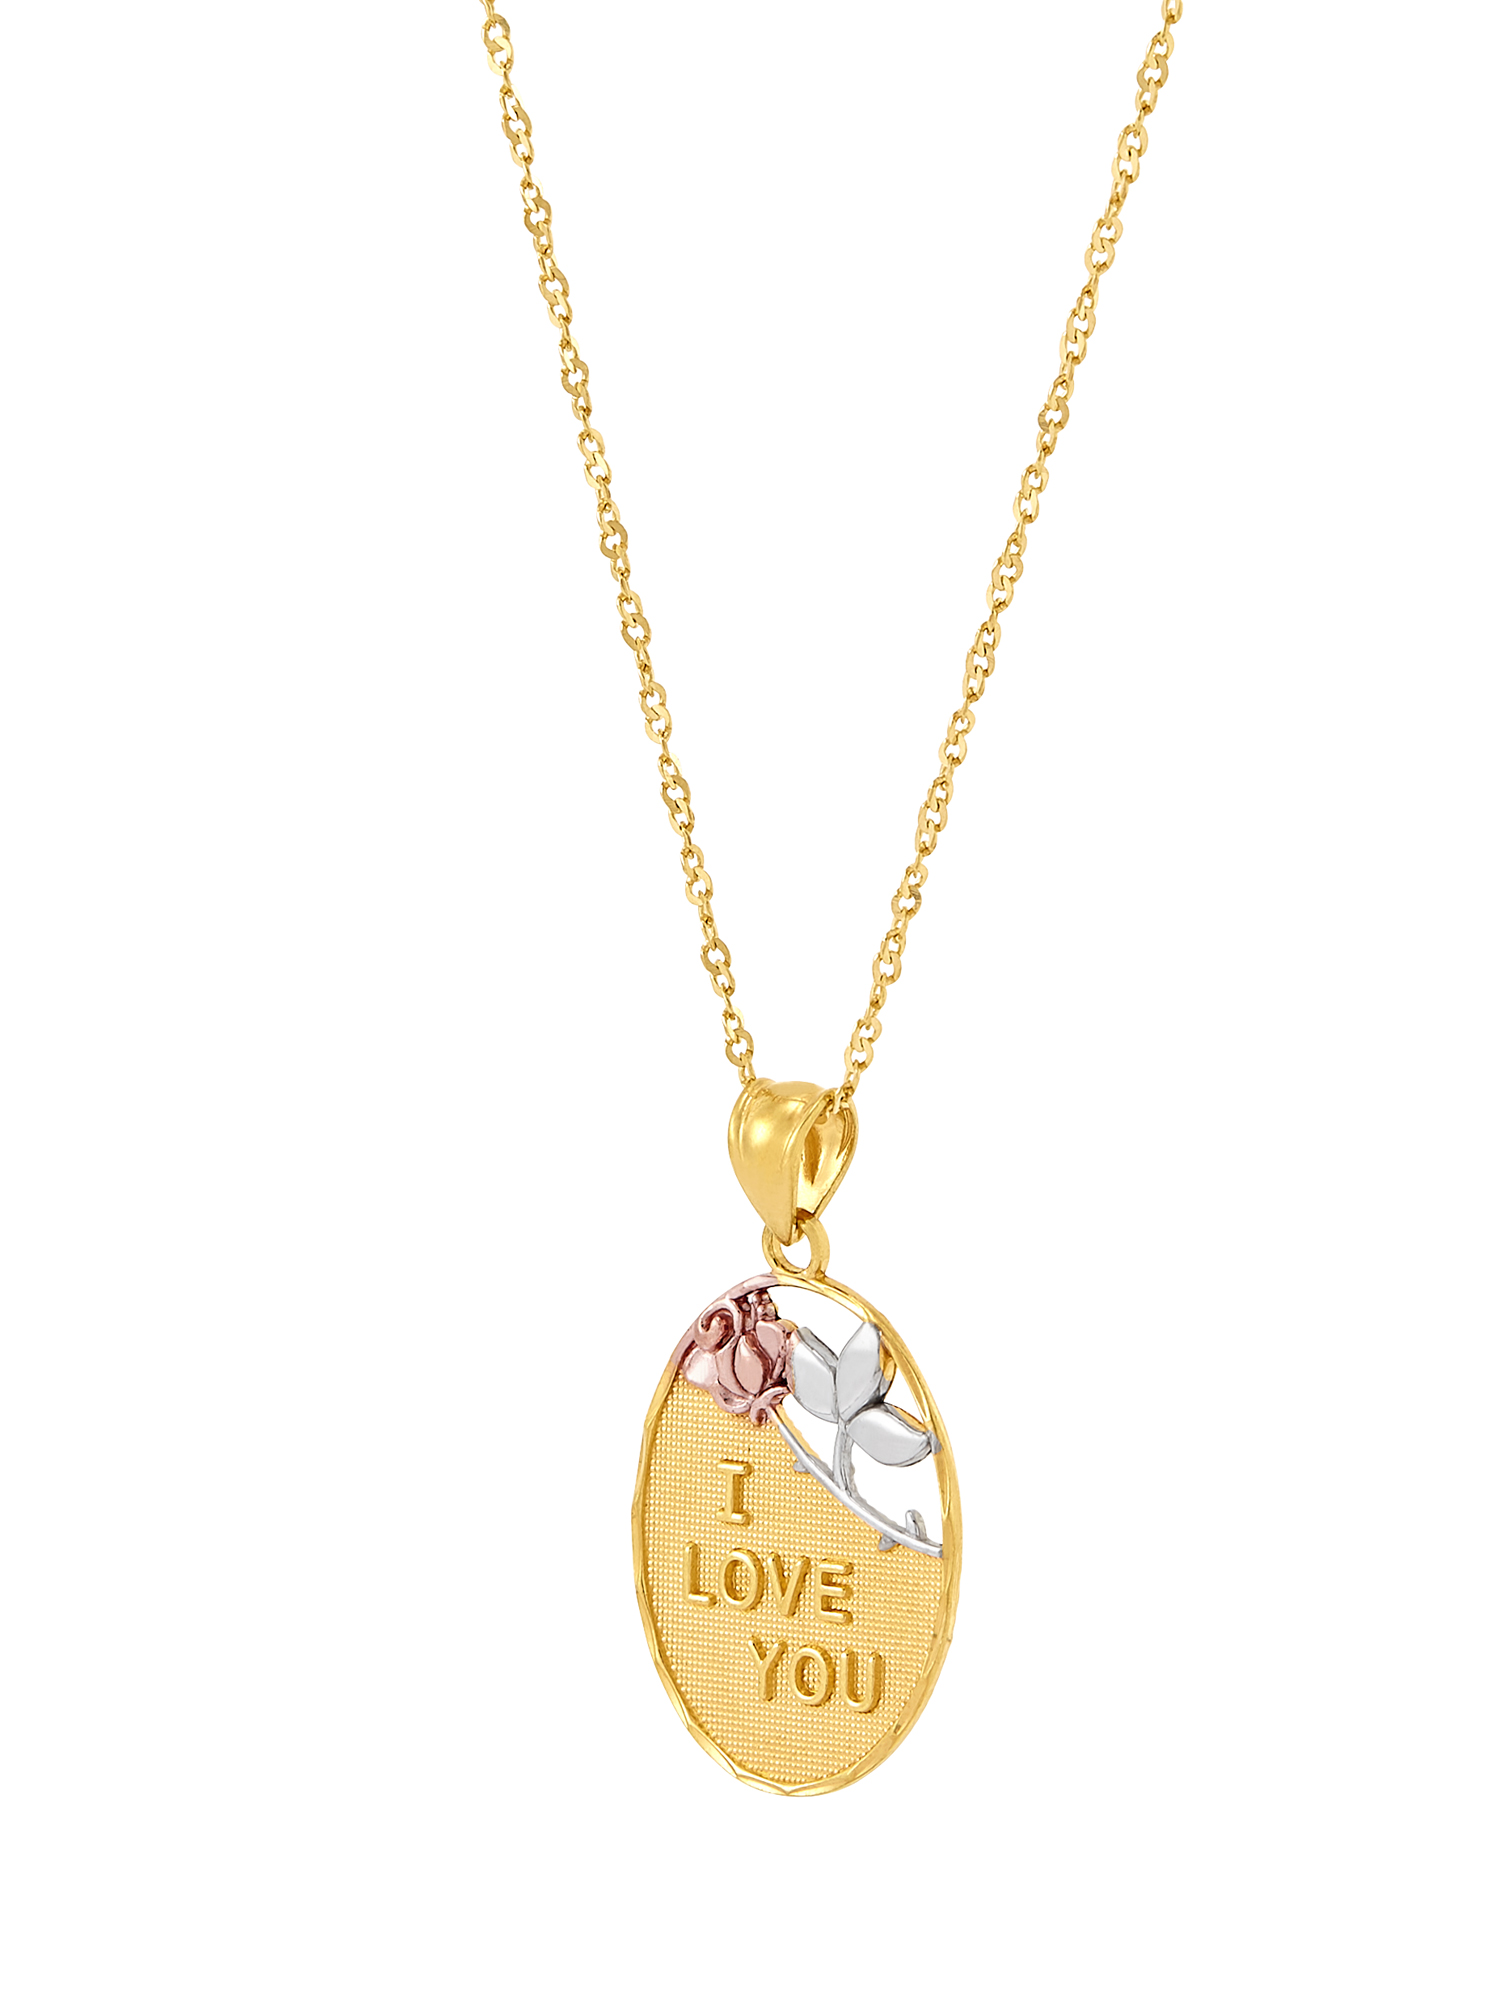 Brilliance Fine Jewelry Sterling Silver and 18K Gold-Plated "I Love You" Oval Pendant, 18" Necklace - image 3 of 4